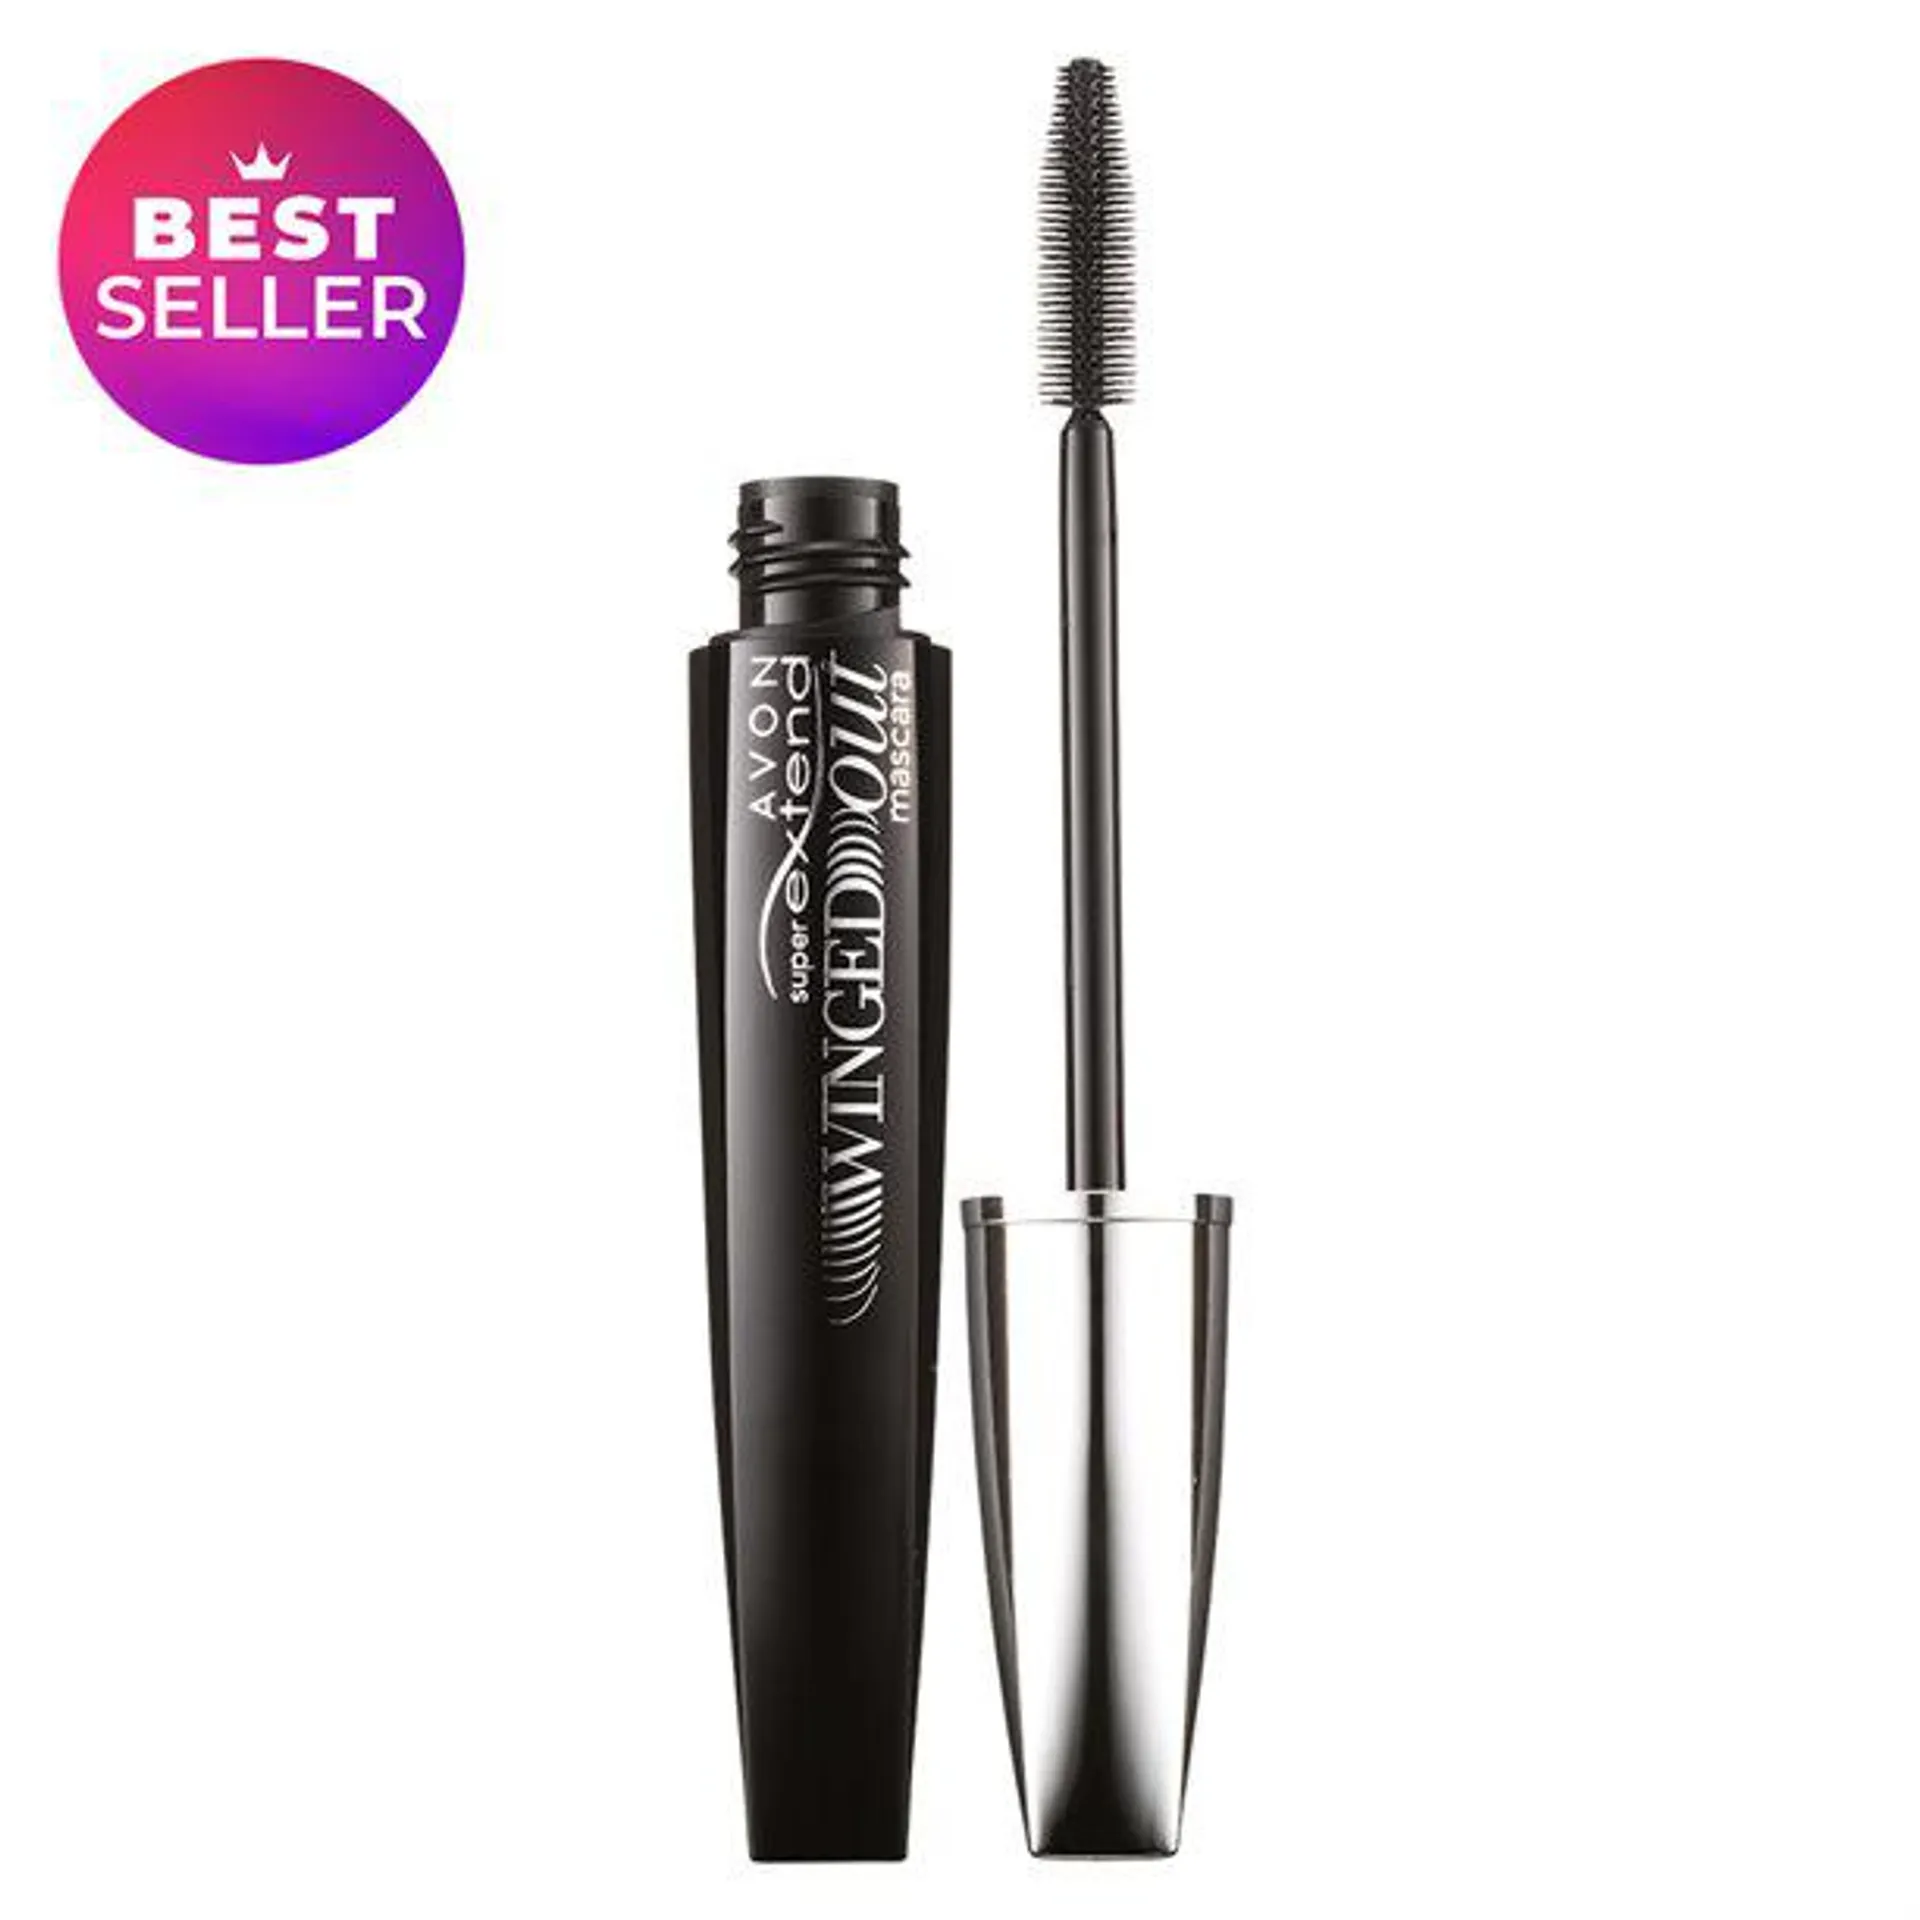 Mascara True Color Super Winged Out